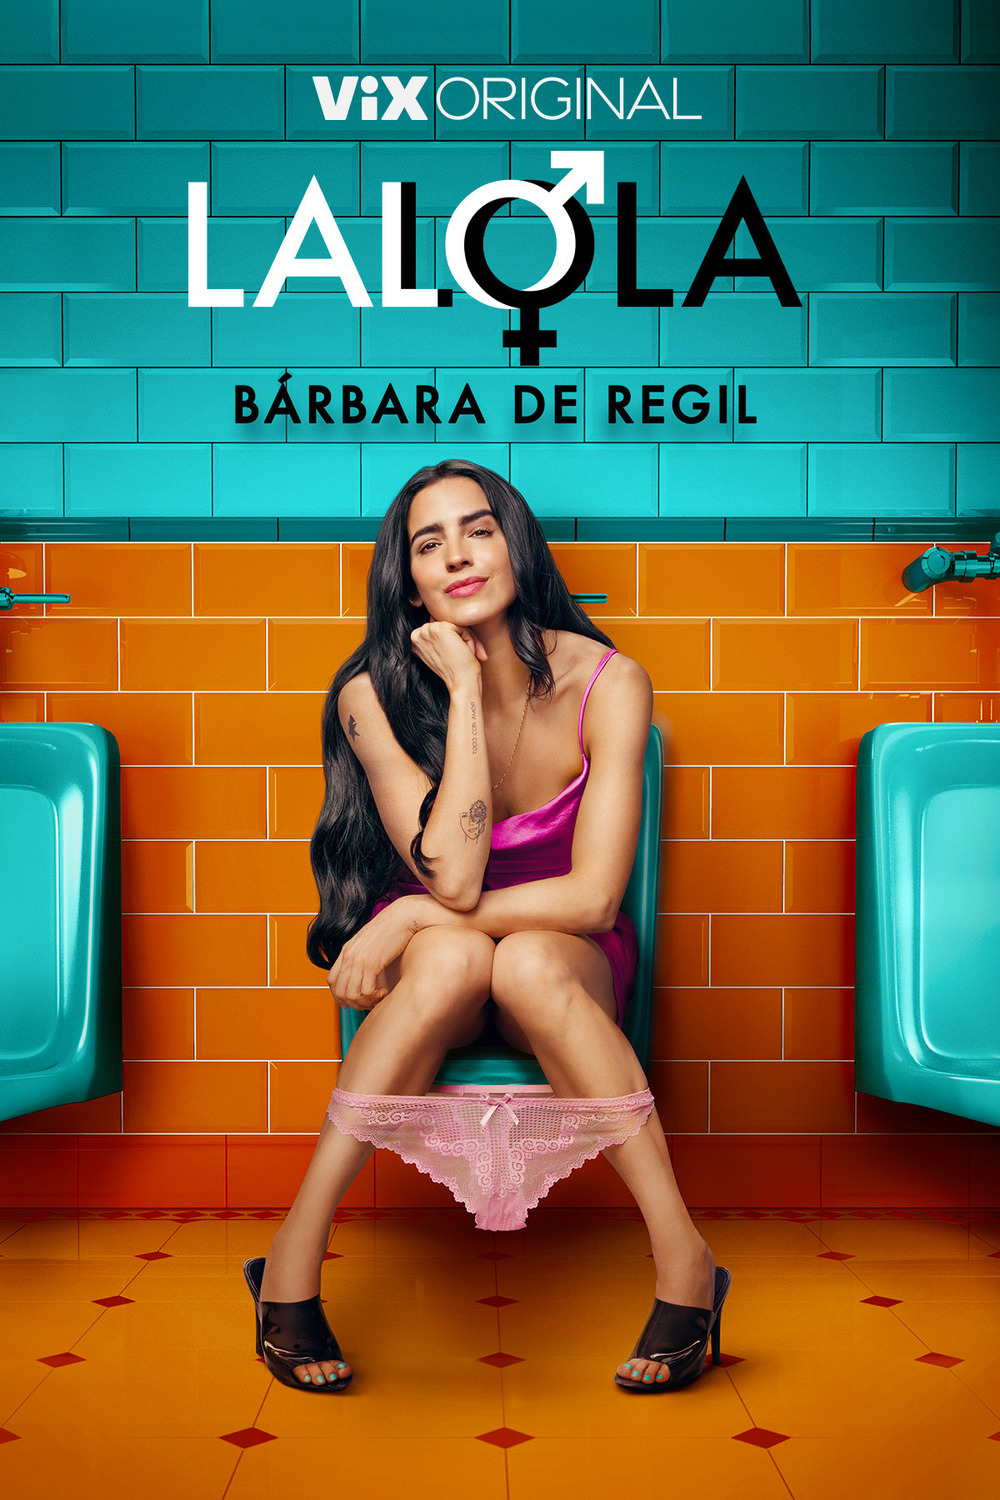 Extra Large TV Poster Image for Lalola 